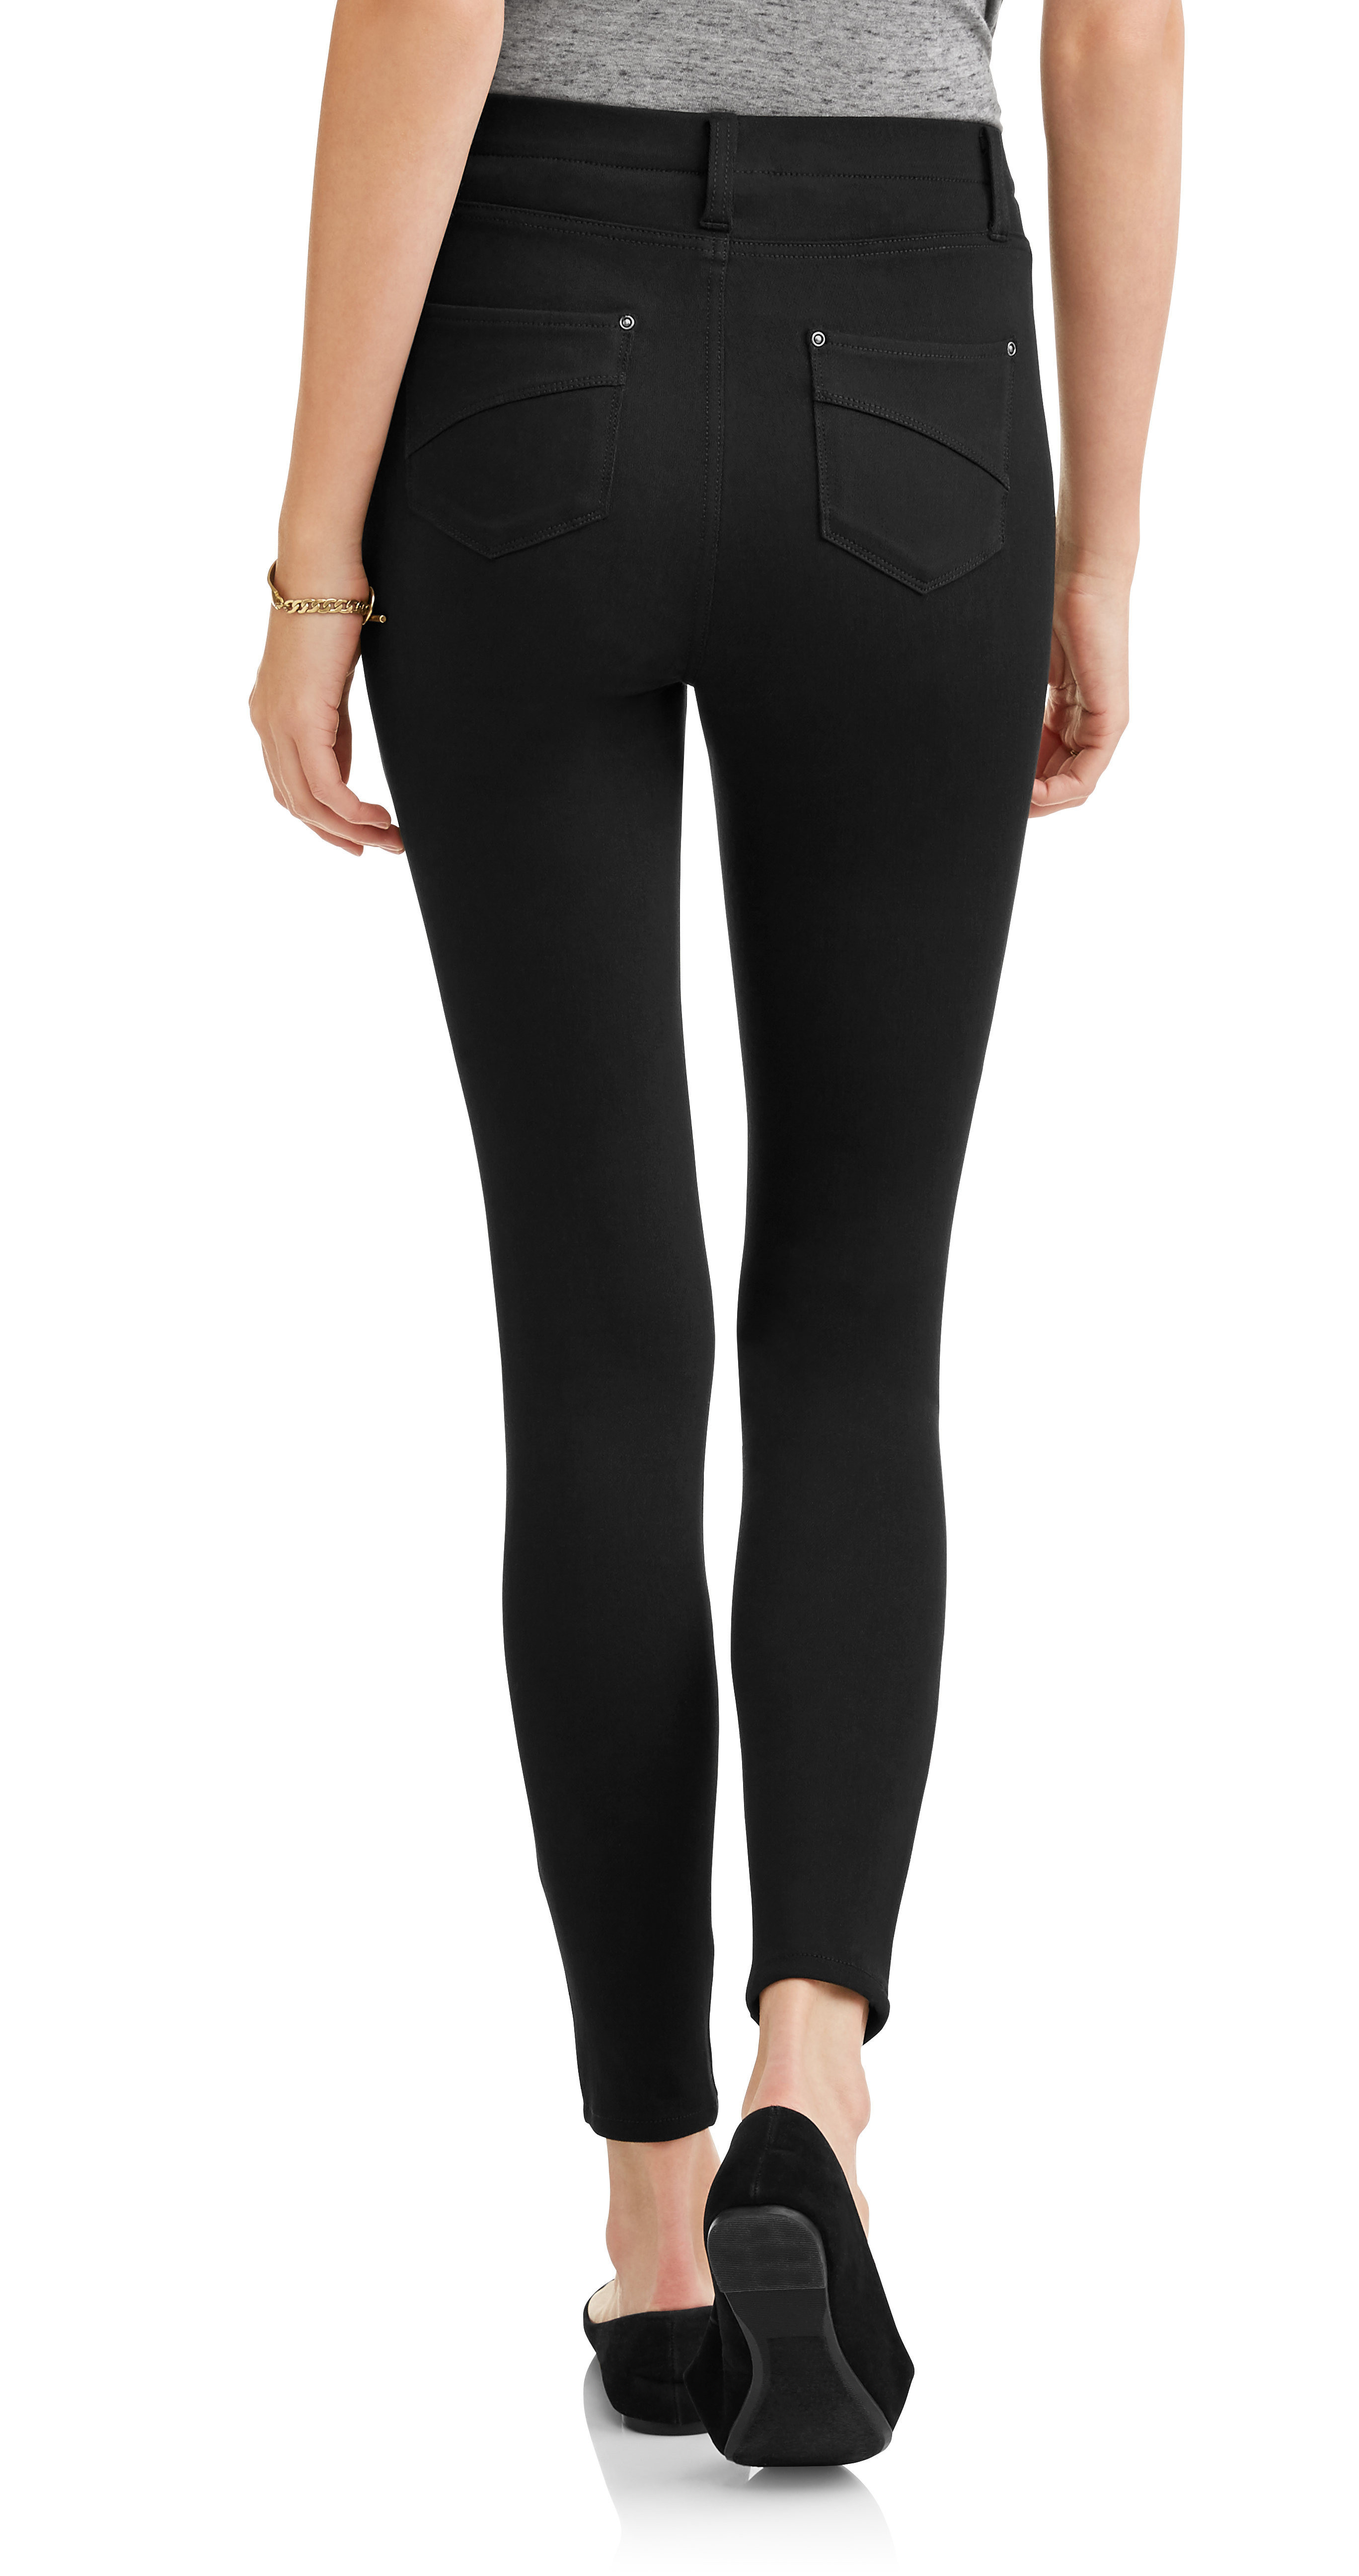 Time and Tru Women's Full Length Soft Knit Color Jeggings - image 4 of 5